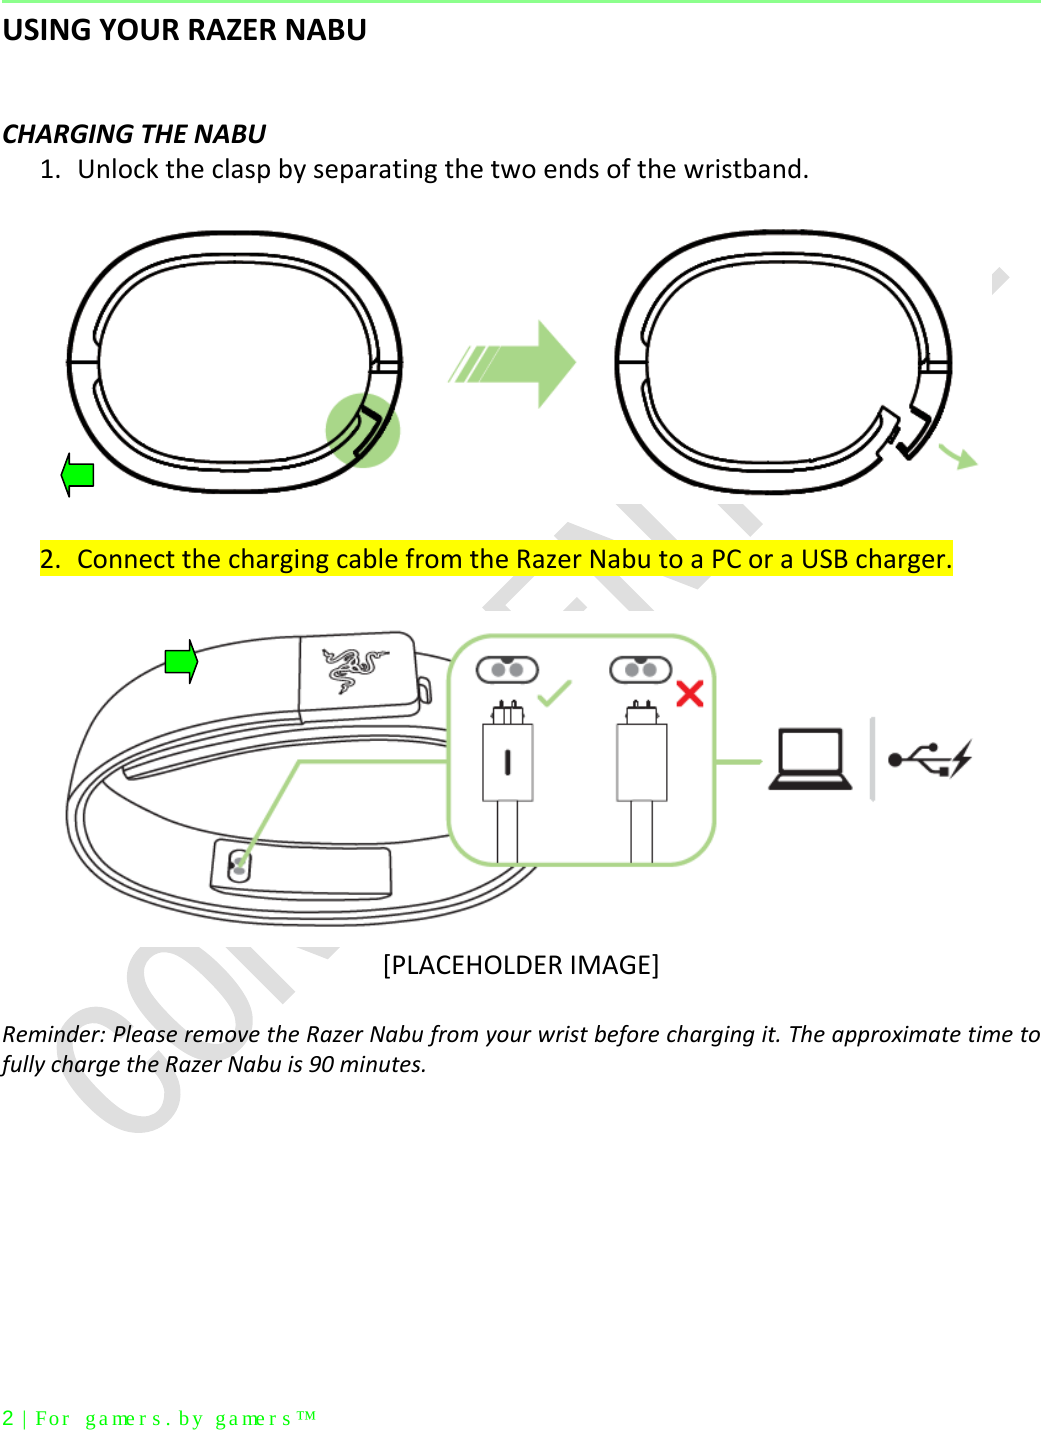  2 | For  gamer s.  by gamer s™  USING YOUR RAZER NABU   CHARGING THE NABU 1. Unlock the clasp by separating the two ends of the wristband.    2. Connect the charging cable from the Razer Nabu to a PC or a USB charger.   [PLACEHOLDER IMAGE]  Reminder: Please remove the Razer Nabu from your wrist before charging it. The approximate time to fully charge the Razer Nabu is 90 minutes.     